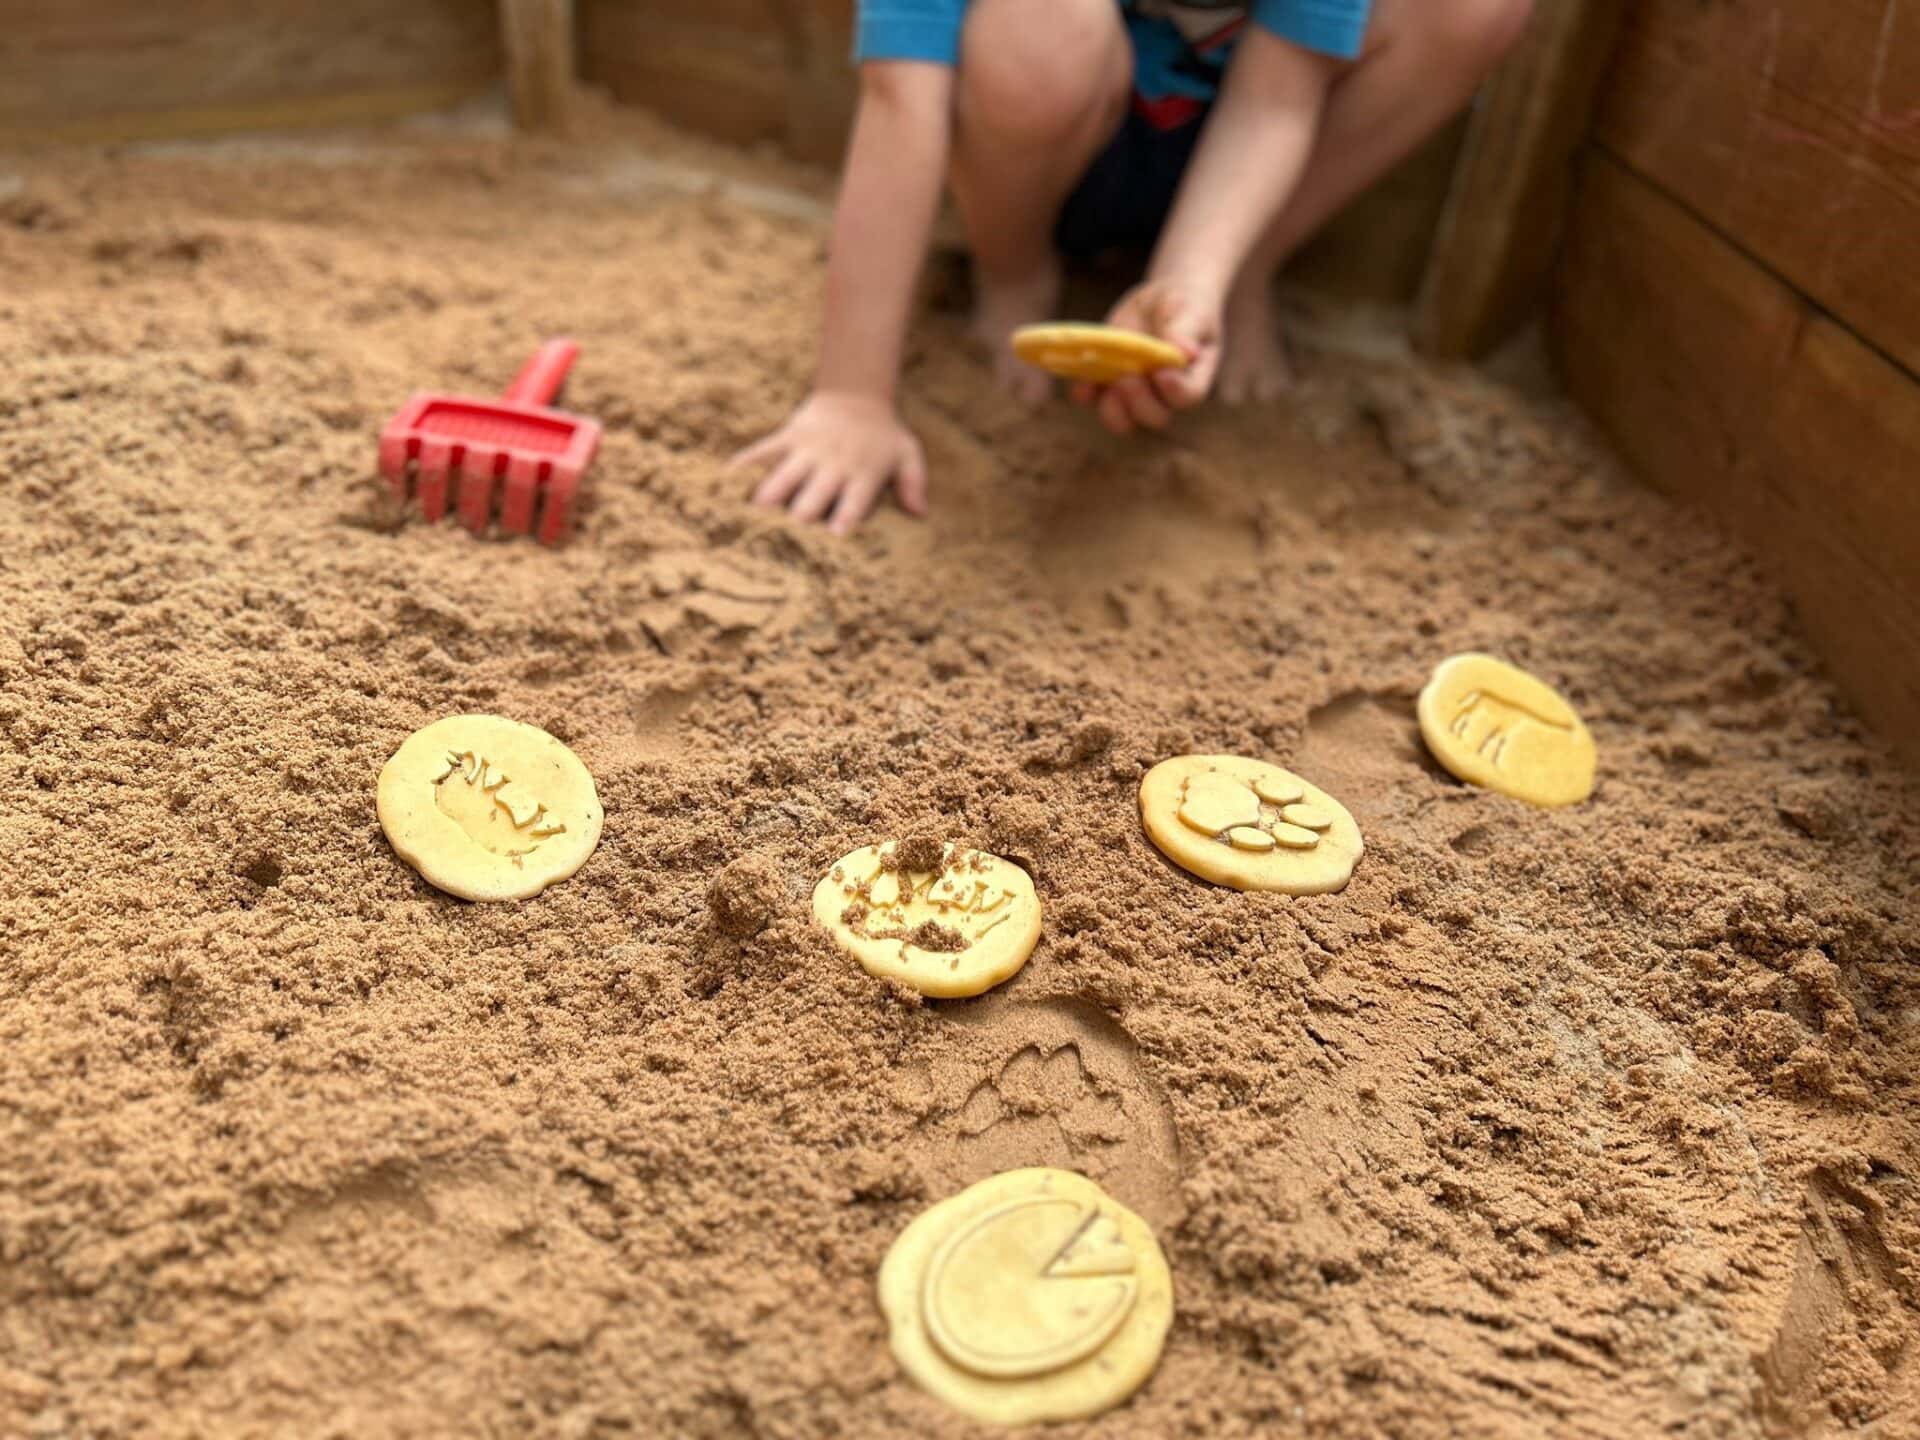 A child playing in a sand pit with coins.